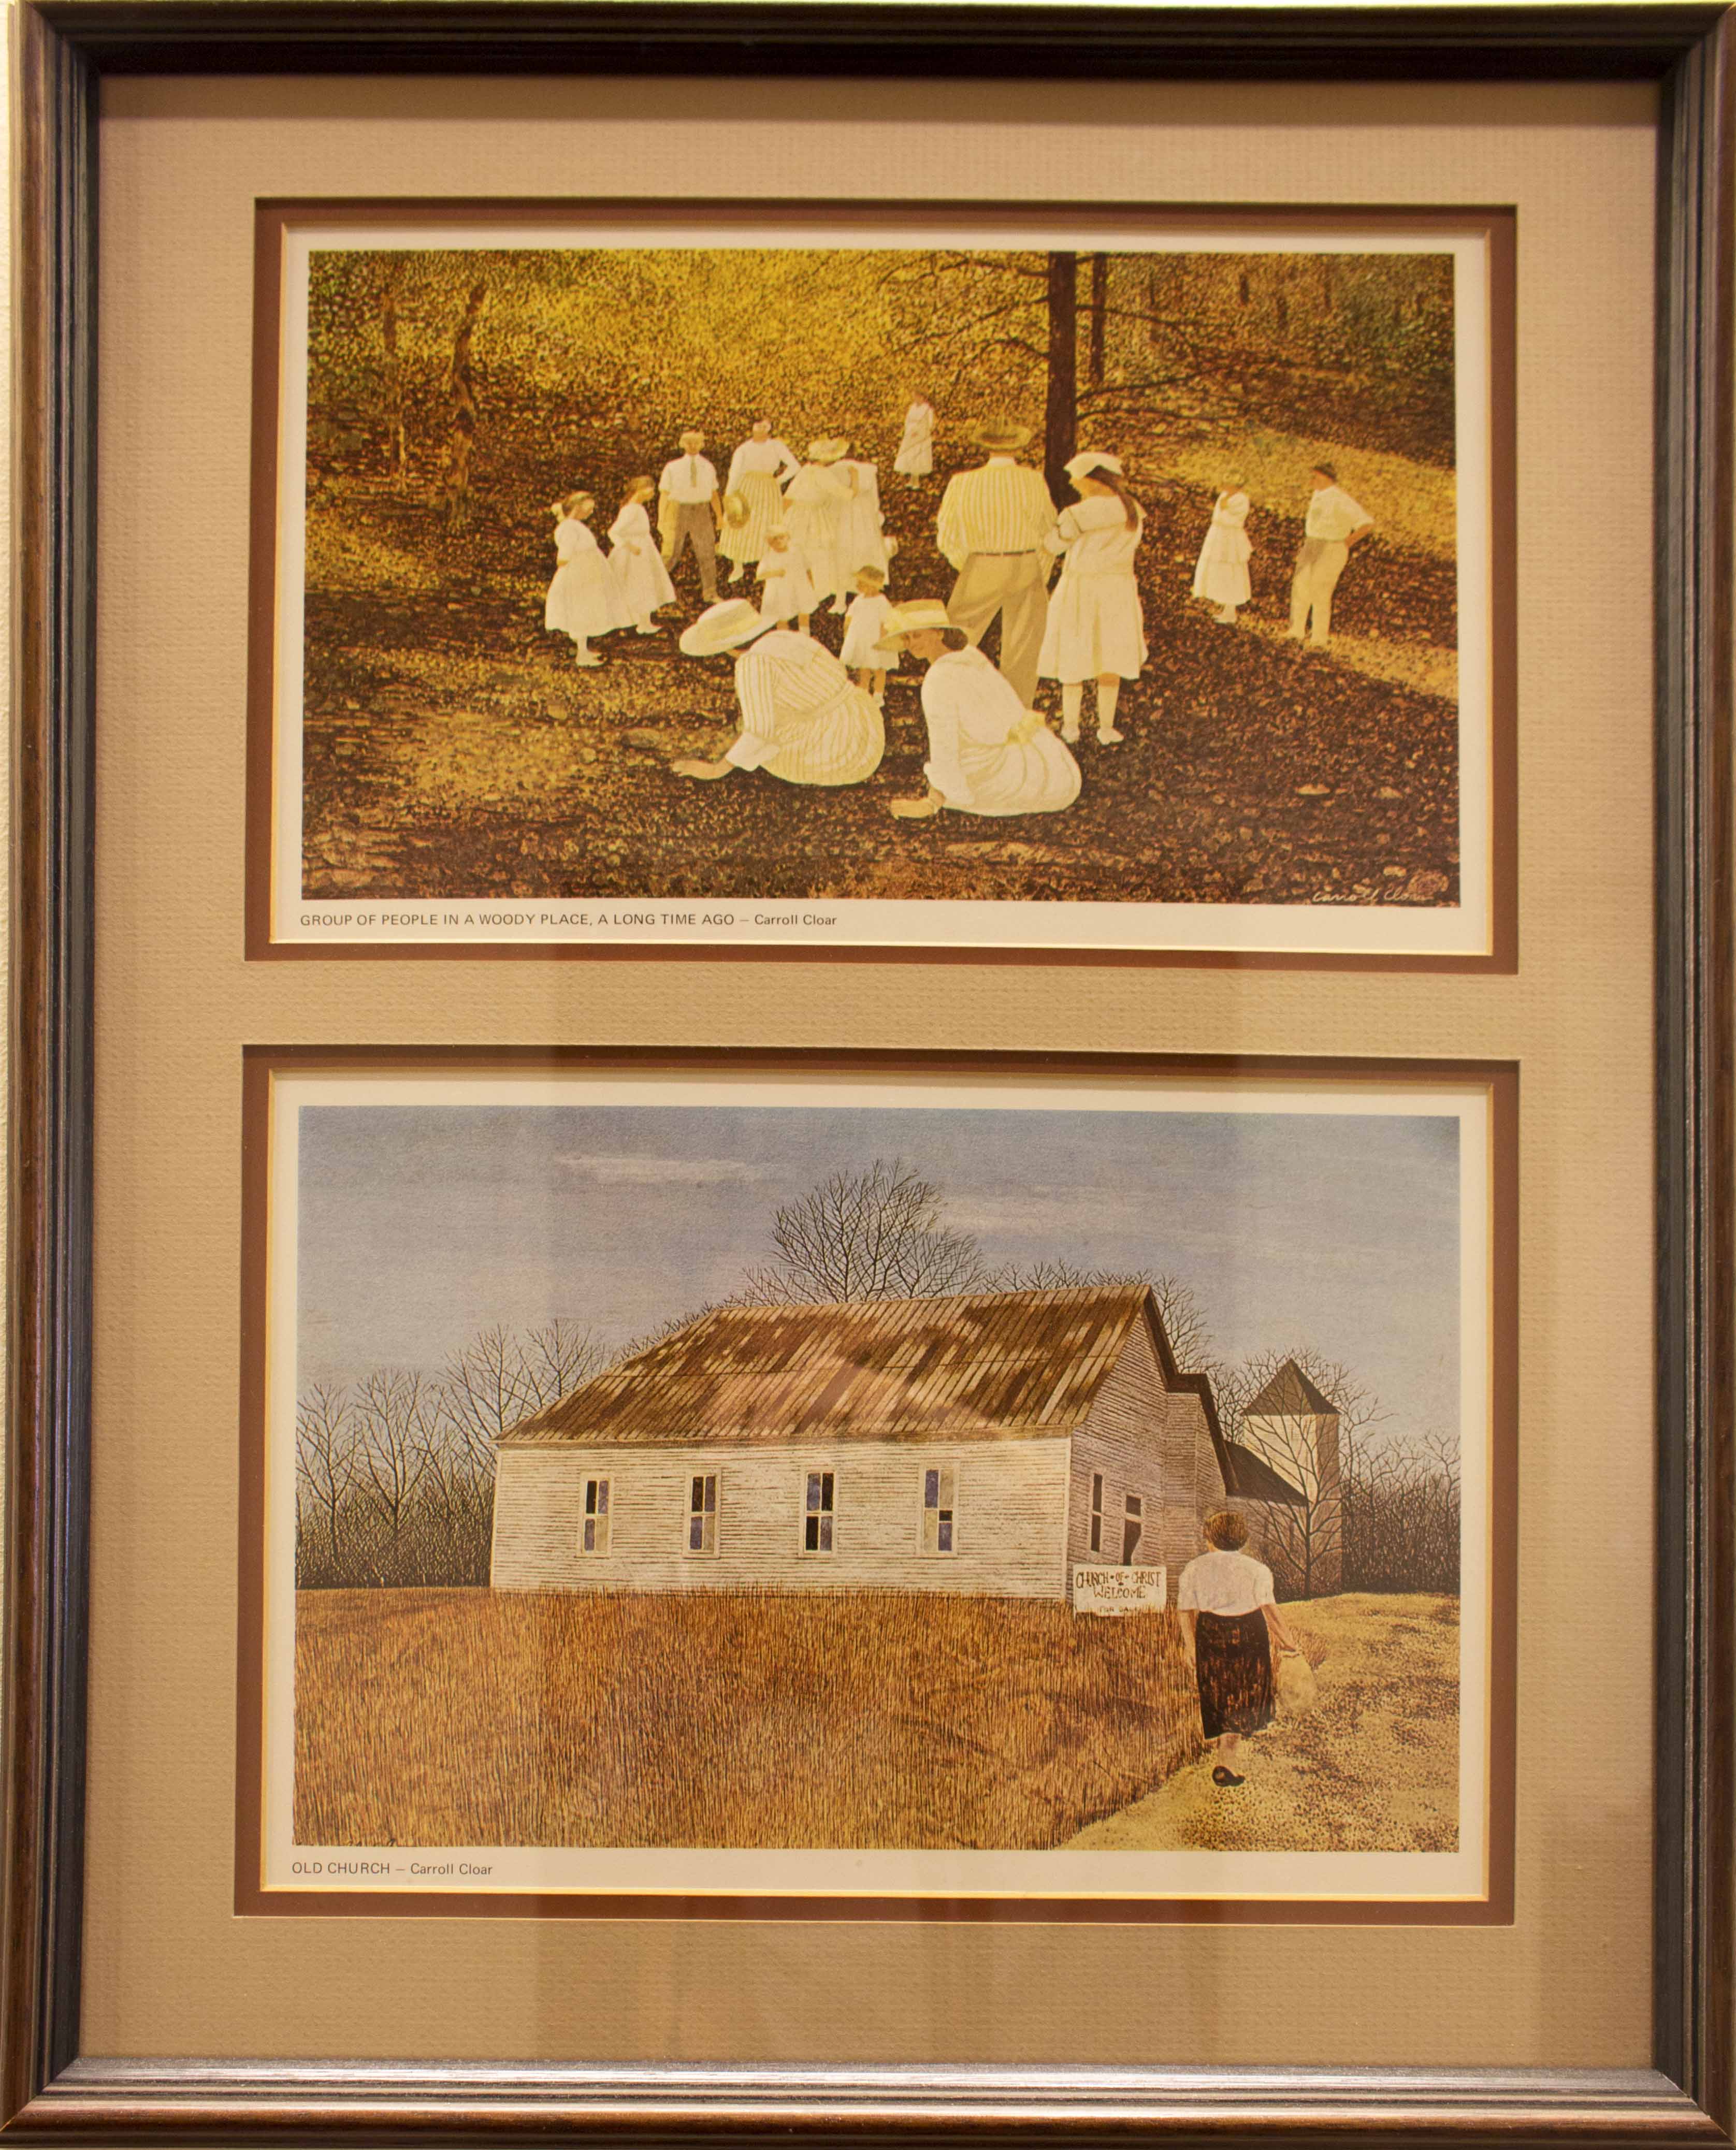 This is a diptych featuring two pieces. In the piece "Old Church," there is a woman walking alongside a browned field next to a white paneled church. The upper piece, "Group of People in a Woody Place, A Long Time Ago," has a group of people dressed in white and white hats in a brown forest.